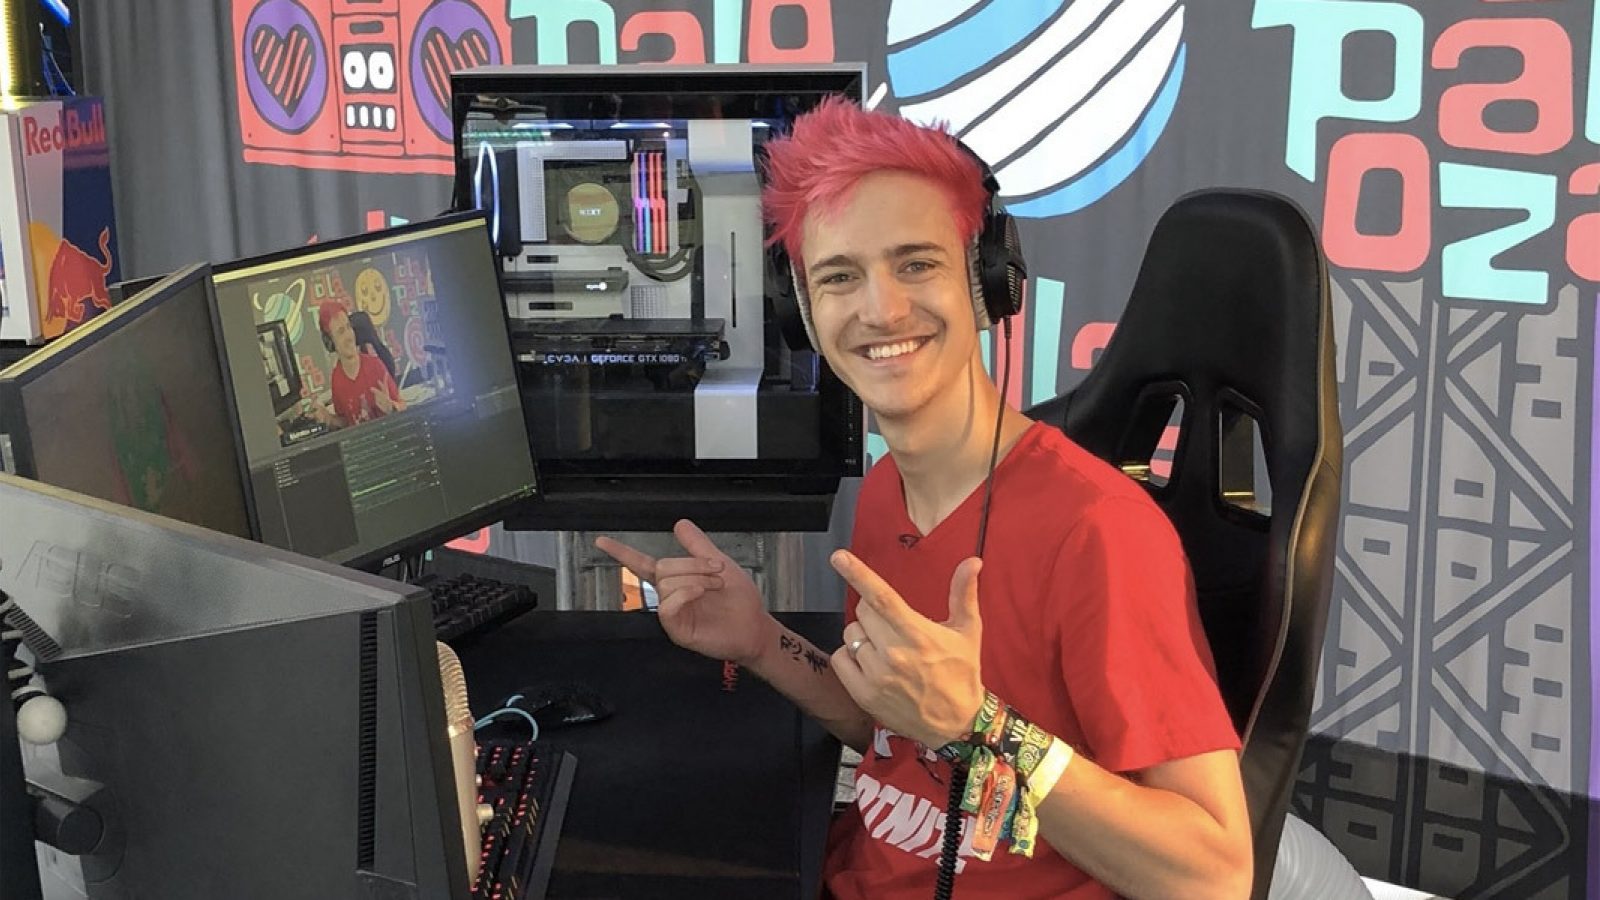 Ninja returns to Twitch for the new Fortnite update